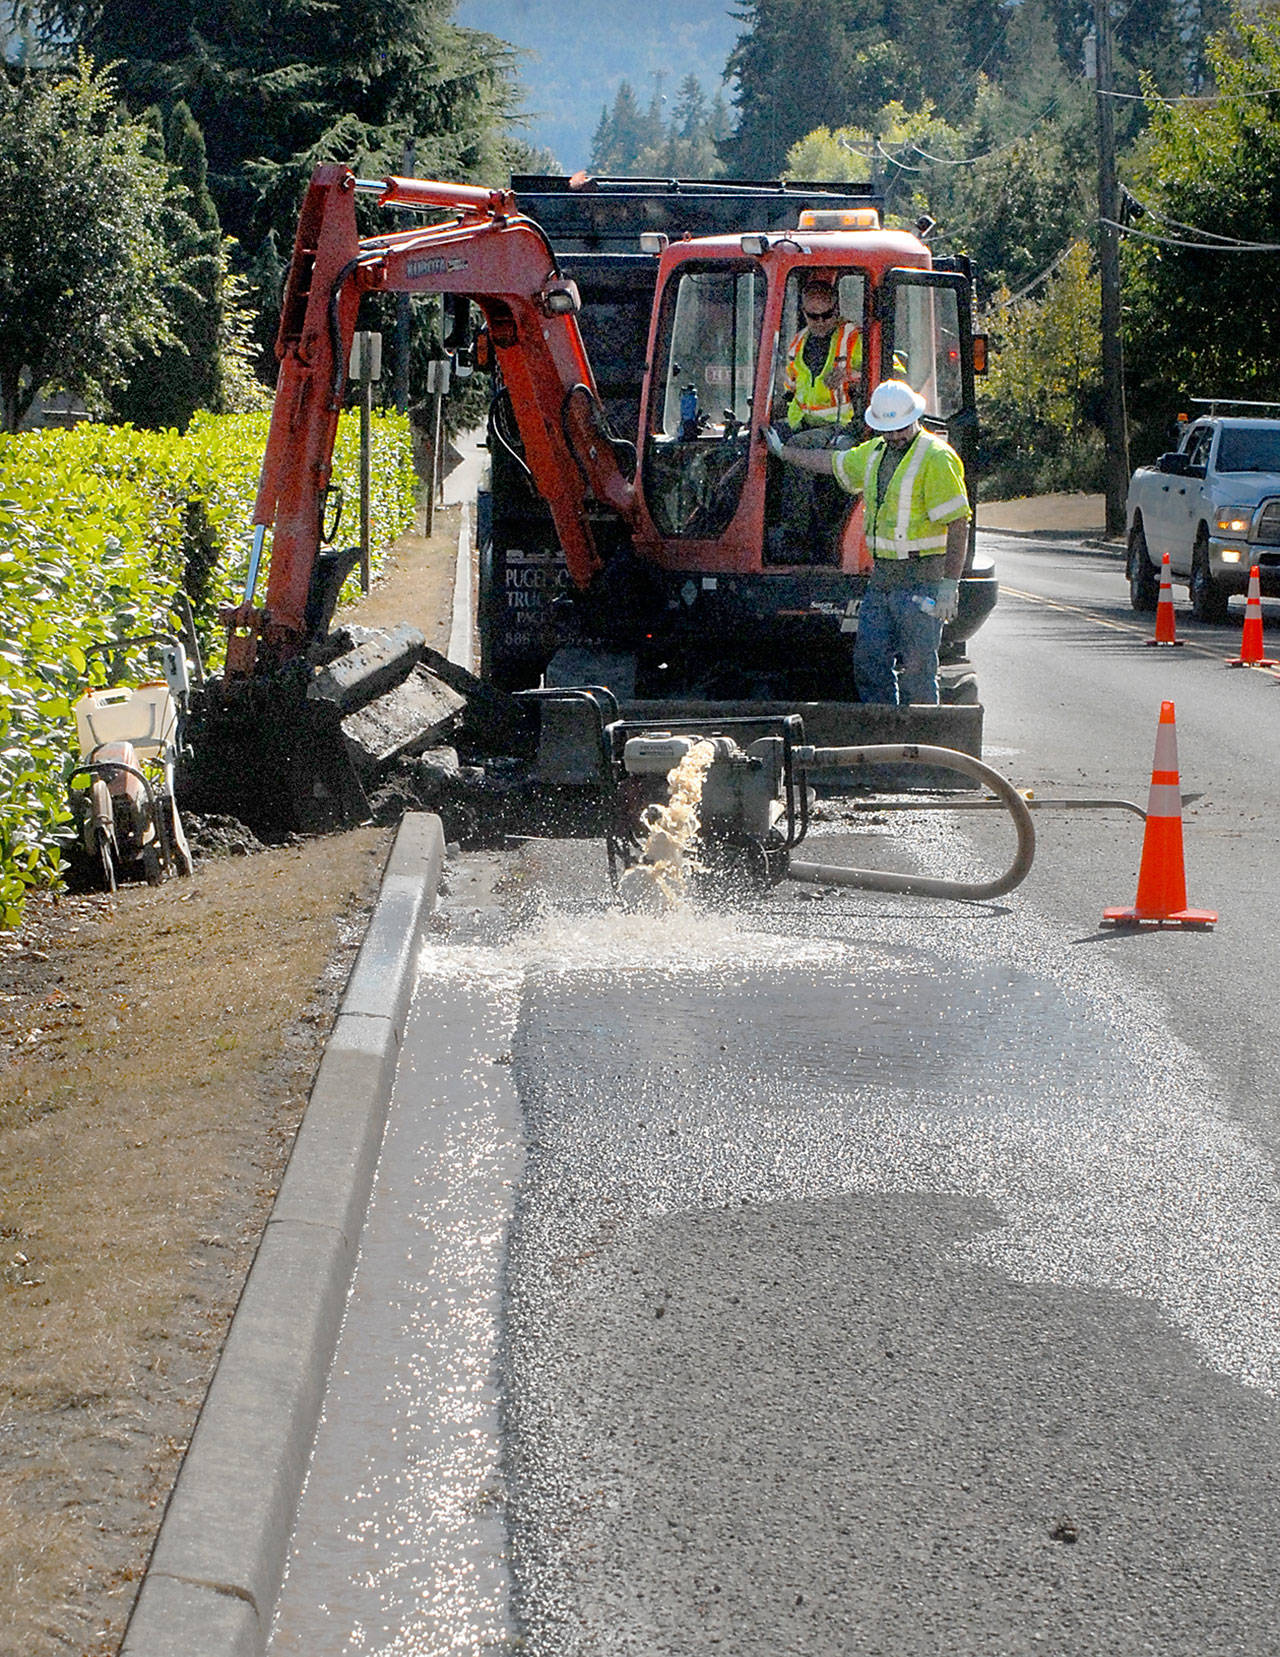 A crew from Clallam County Public Utility District 1 drains water from an excavation after a water main break along Monroe Road east of Port Angeles on Thursday. (Keith Thorpe/Peninsula Daily News)